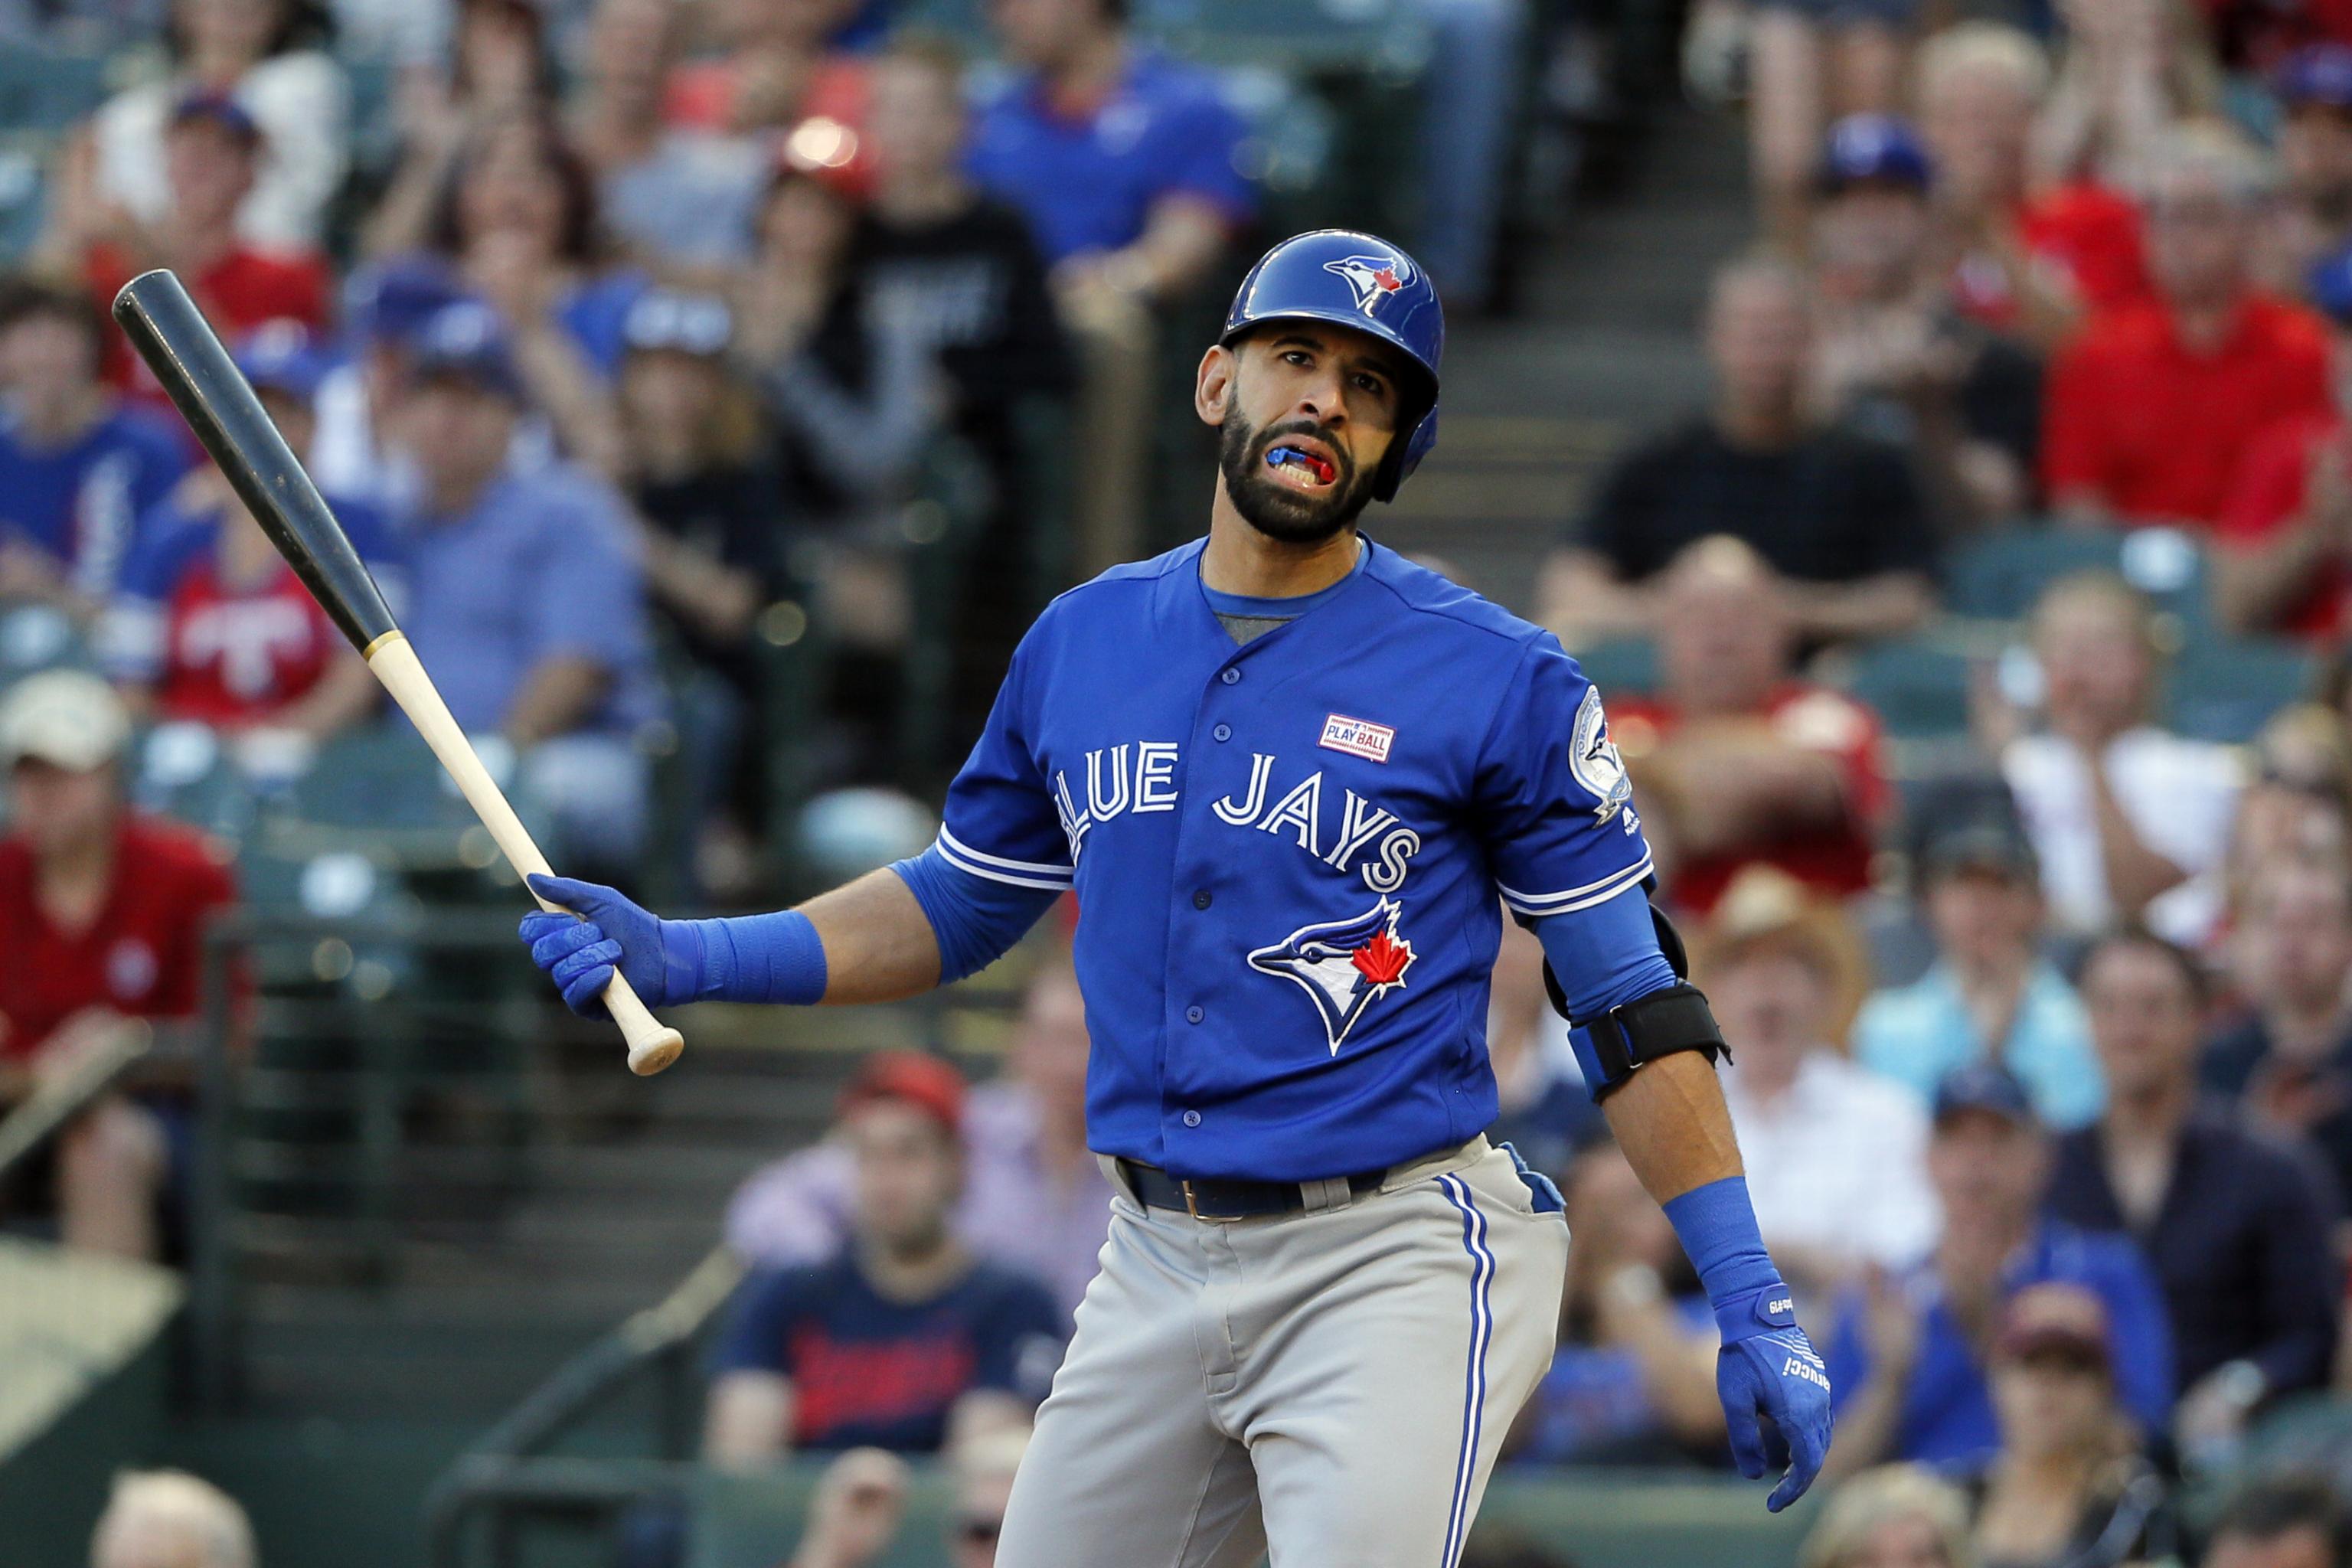 Texas Rangers' Rougned Odor lands punch to face of Toronto Blue